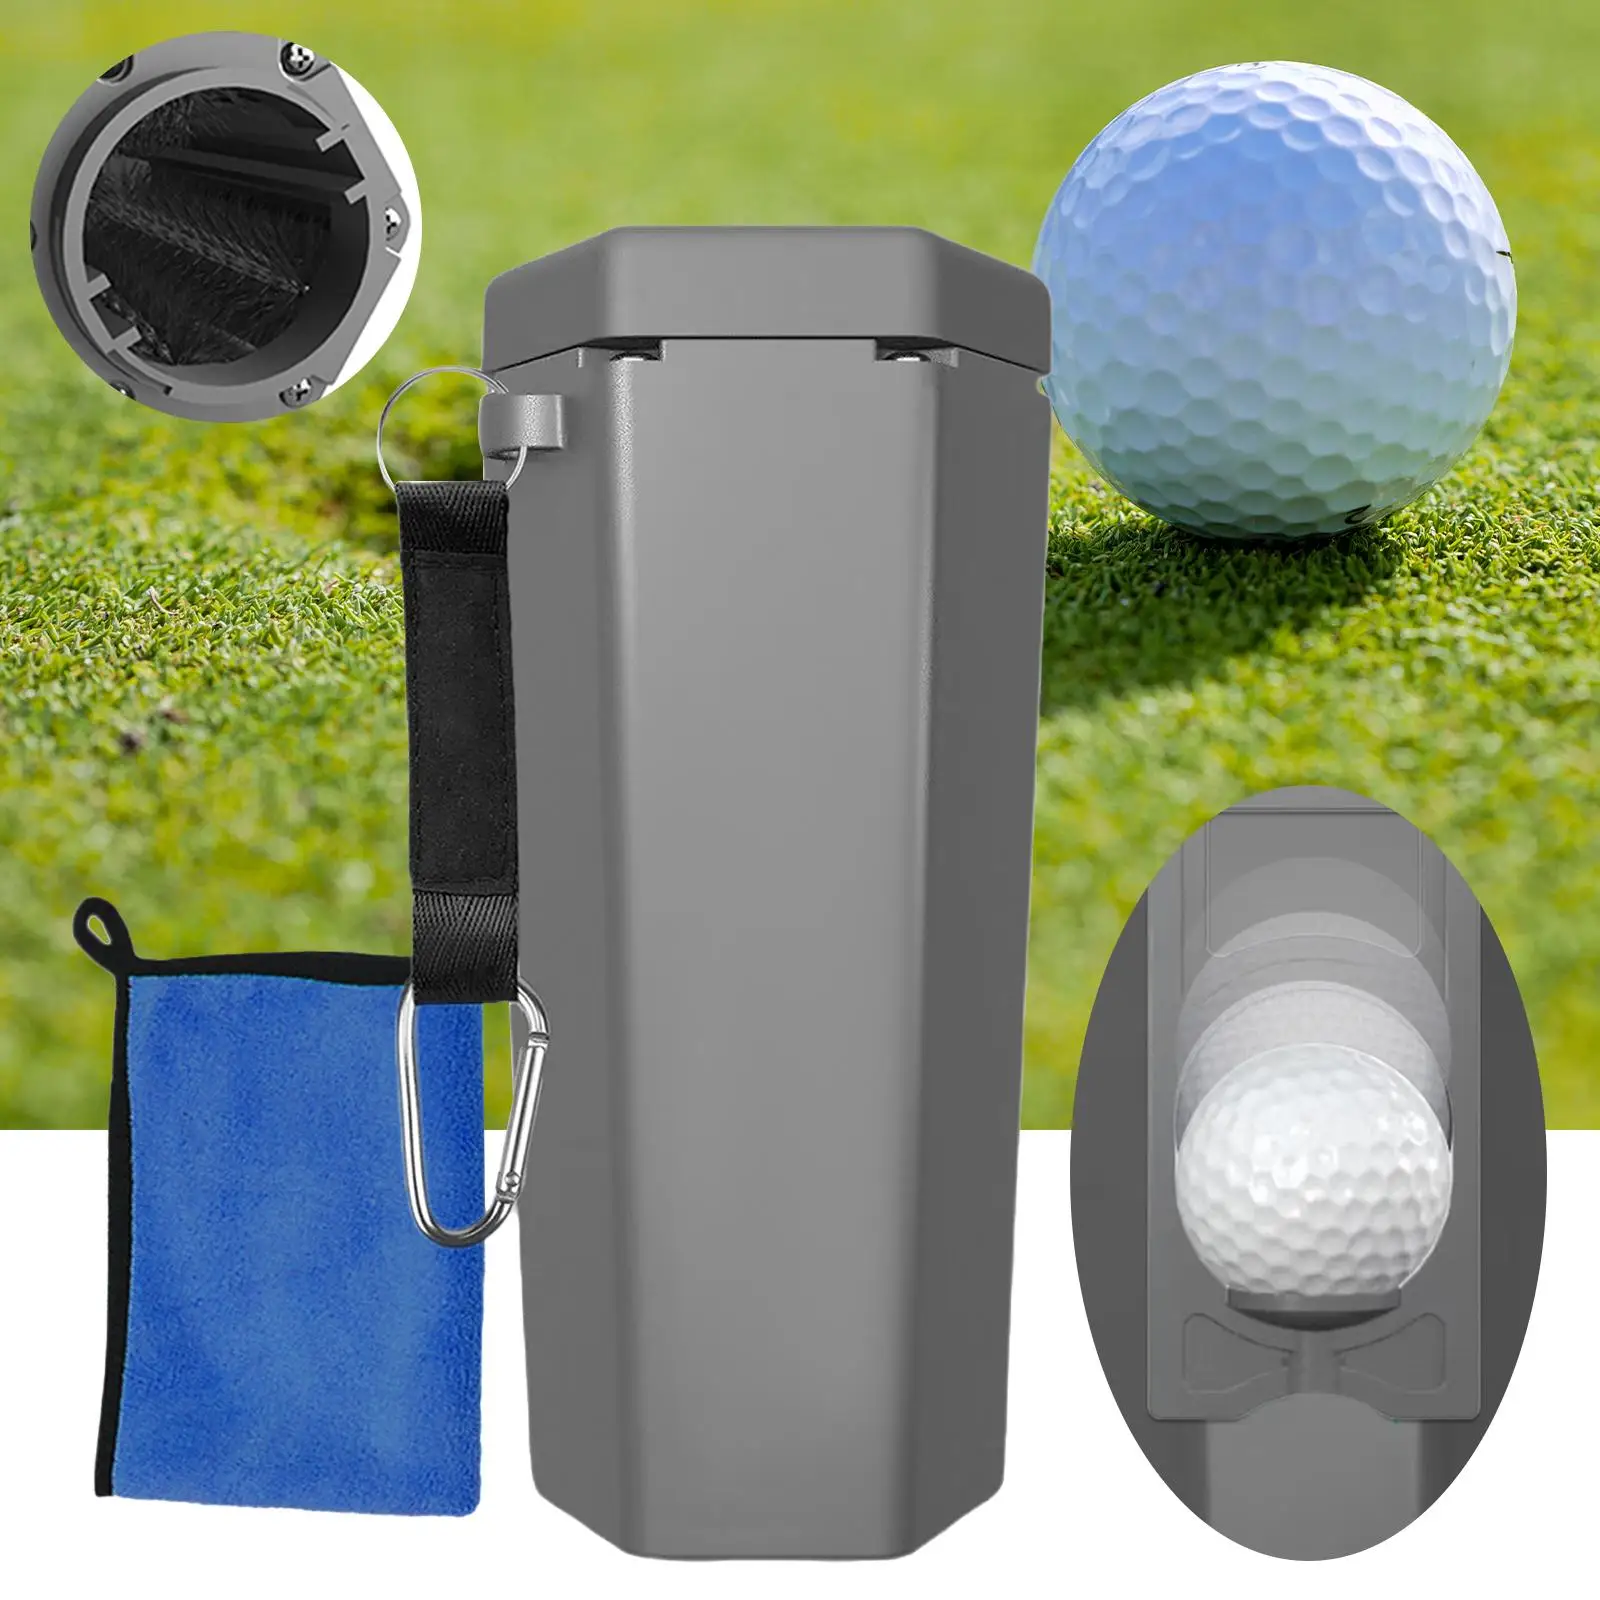 Golf Ball Washer with Towel Multipurpose Unique Holder Attachments Brush Cleaner for Traveling Friends Colleagues Golfer Outdoor